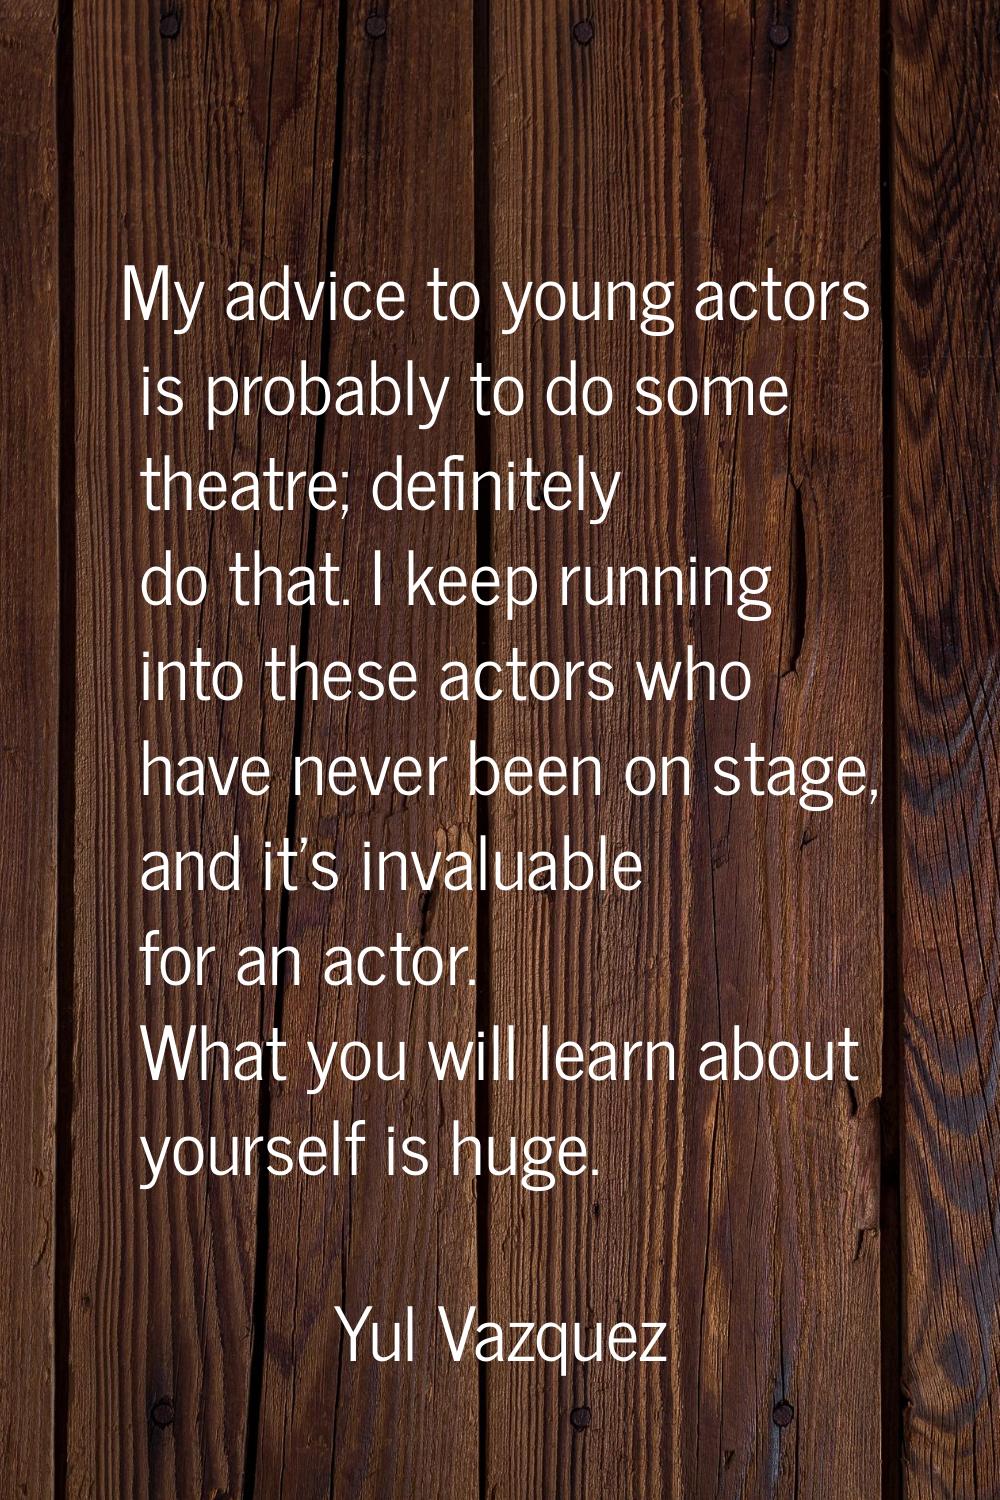 My advice to young actors is probably to do some theatre; definitely do that. I keep running into t